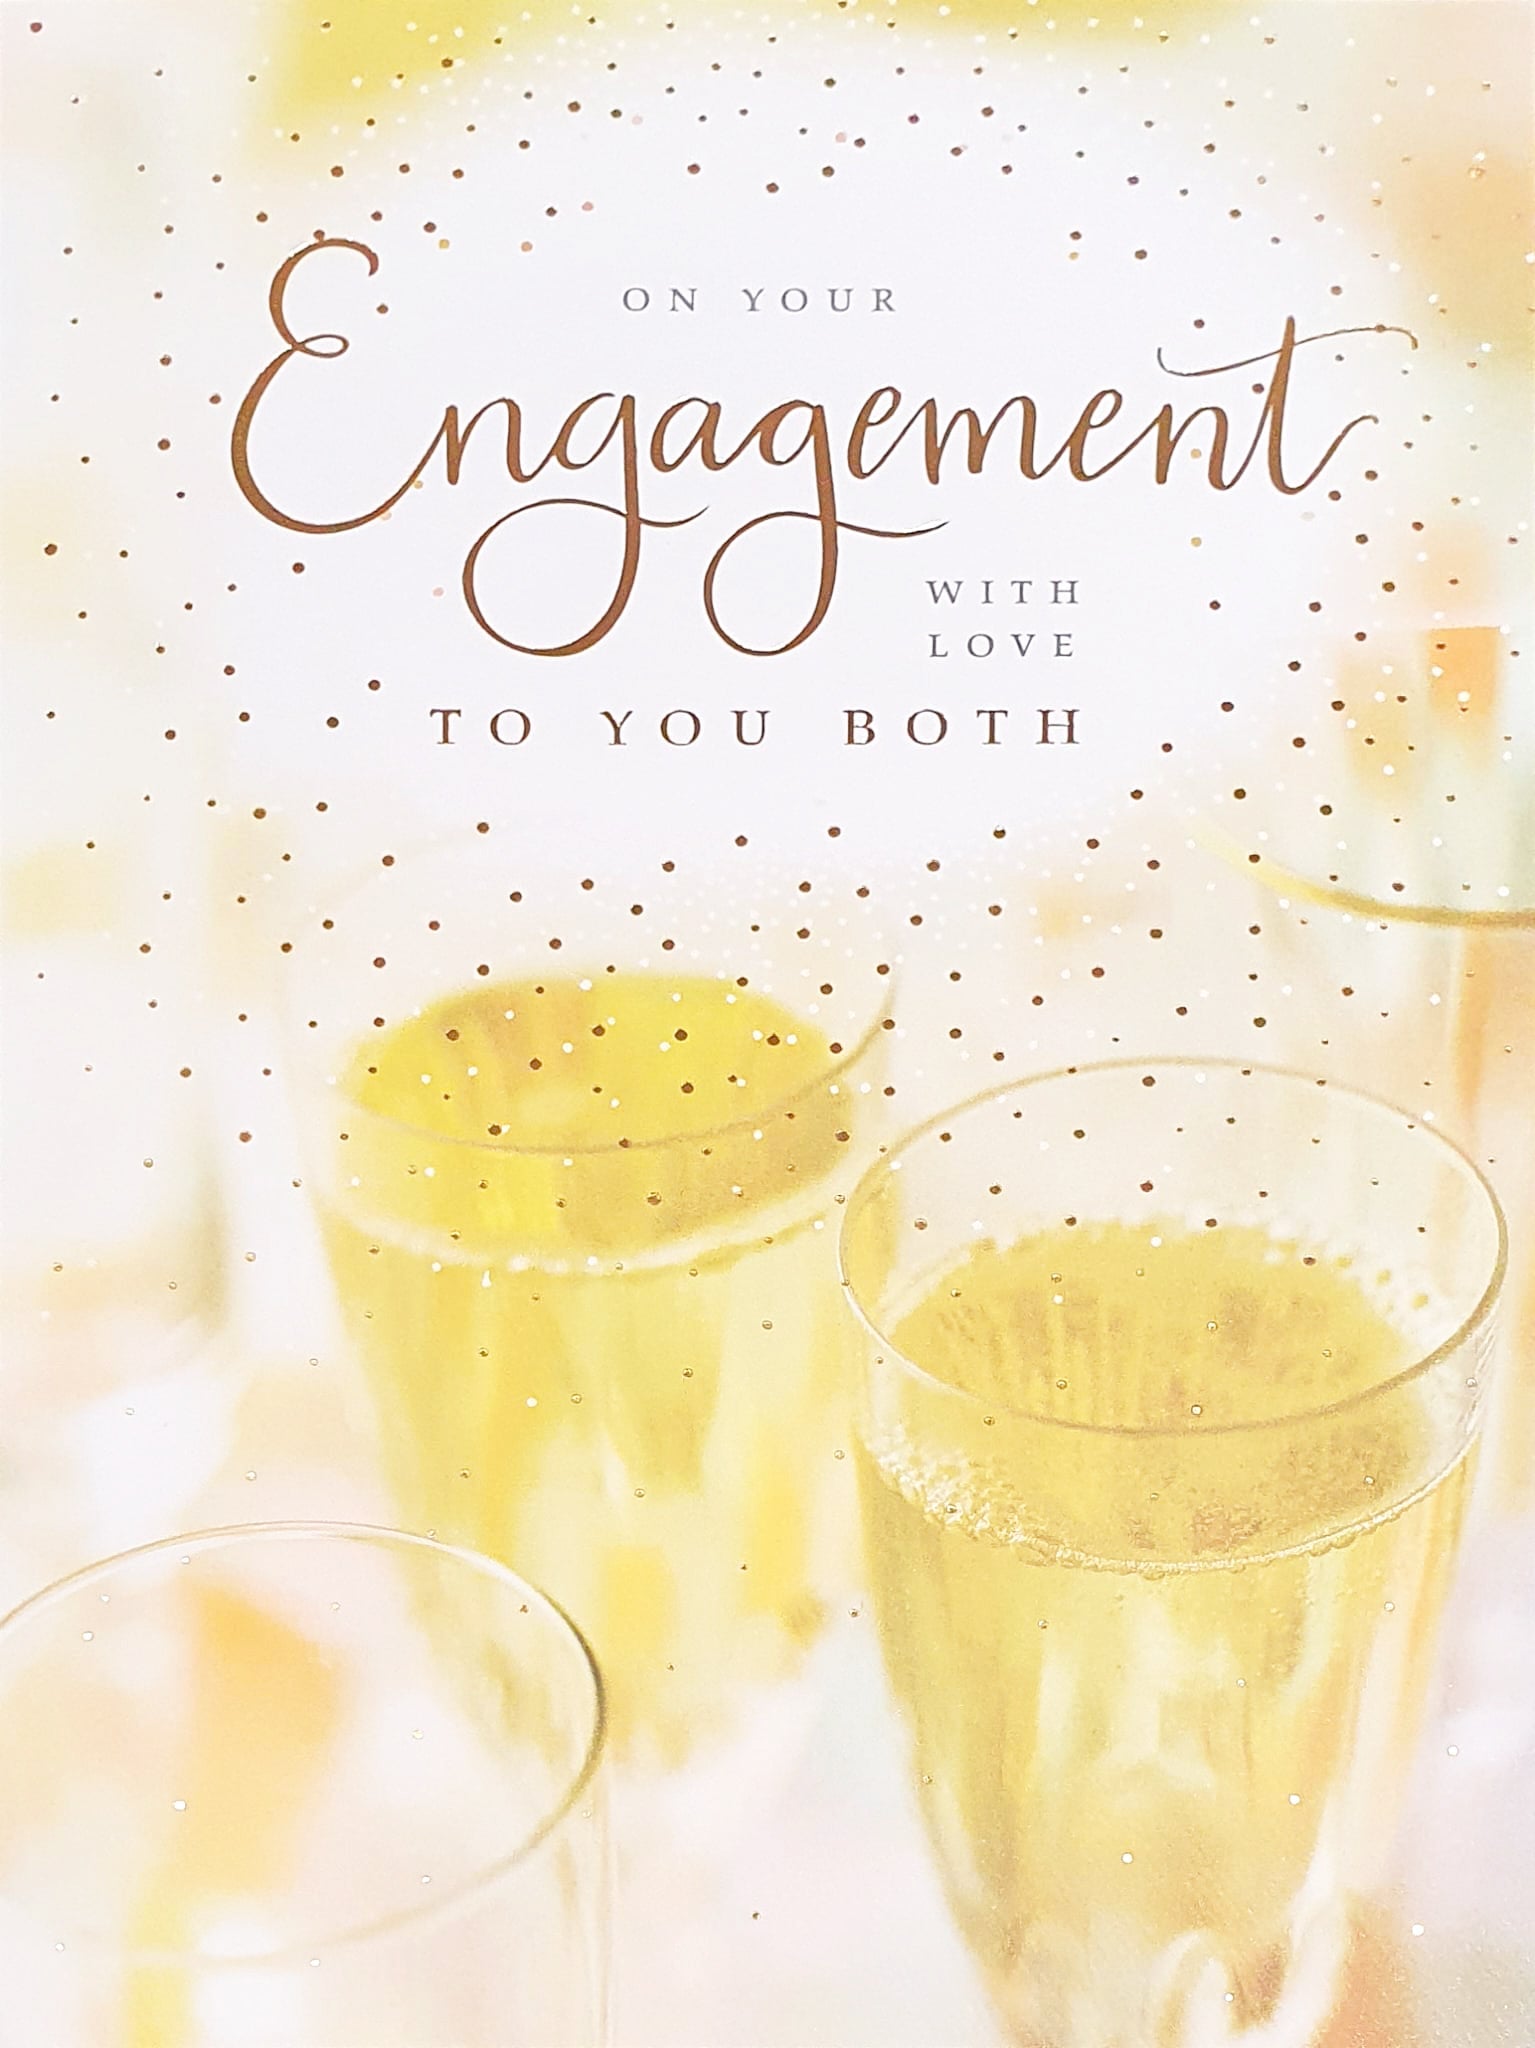 On Your Engagement - Champagne And Bubbles